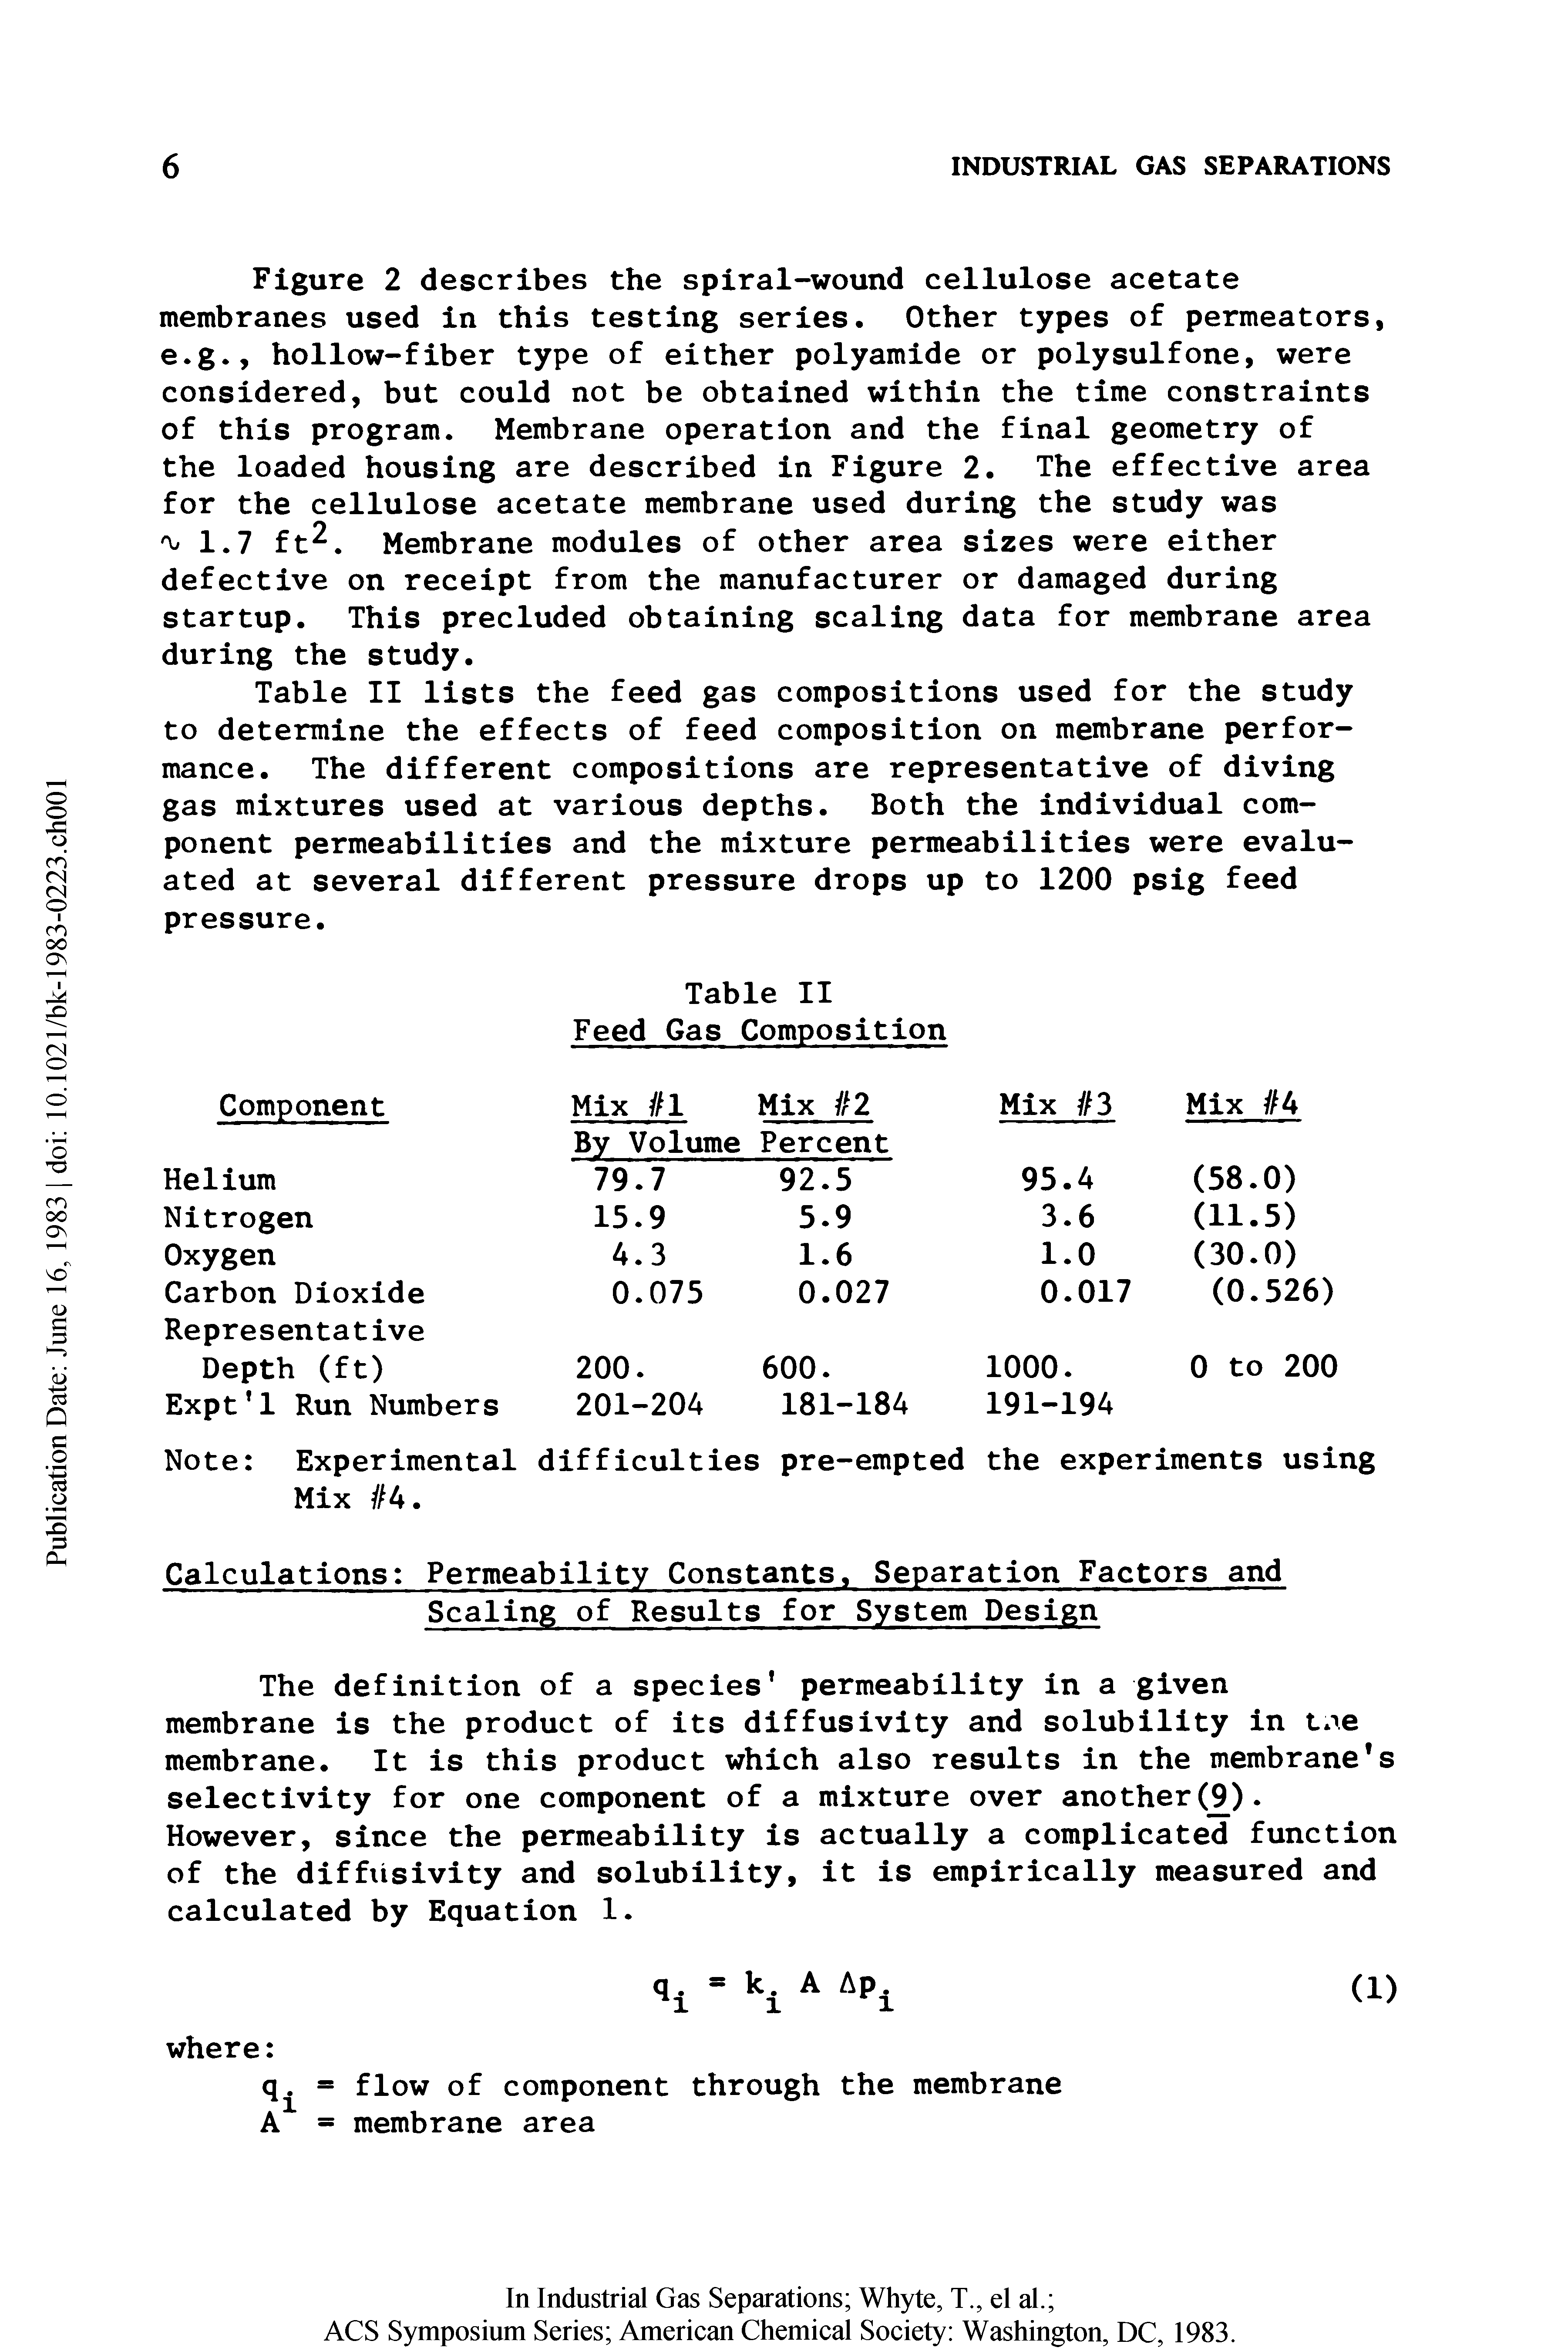 Table II lists the feed gas compositions used for the study to determine the effects of feed composition on membrane performance. The different compositions are representative of diving gas mixtures used at various depths. Both the individual component permeabilities and the mixture permeabilities were evaluated at several different pressure drops up to 1200 psig feed pressure.